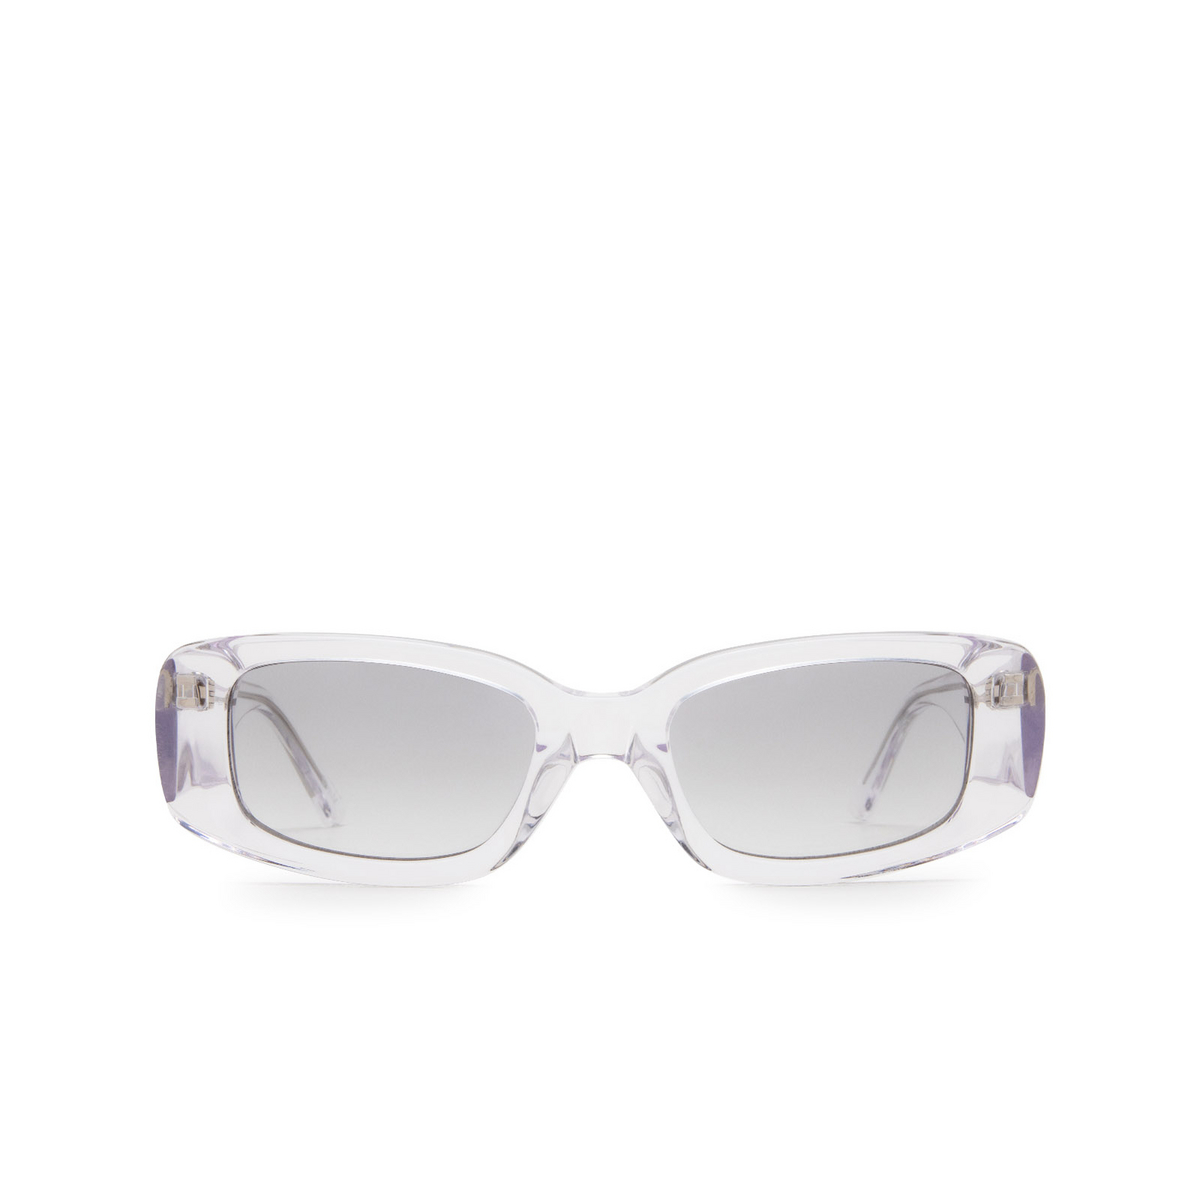 Chimi 10 Sunglasses CLEAR - front view